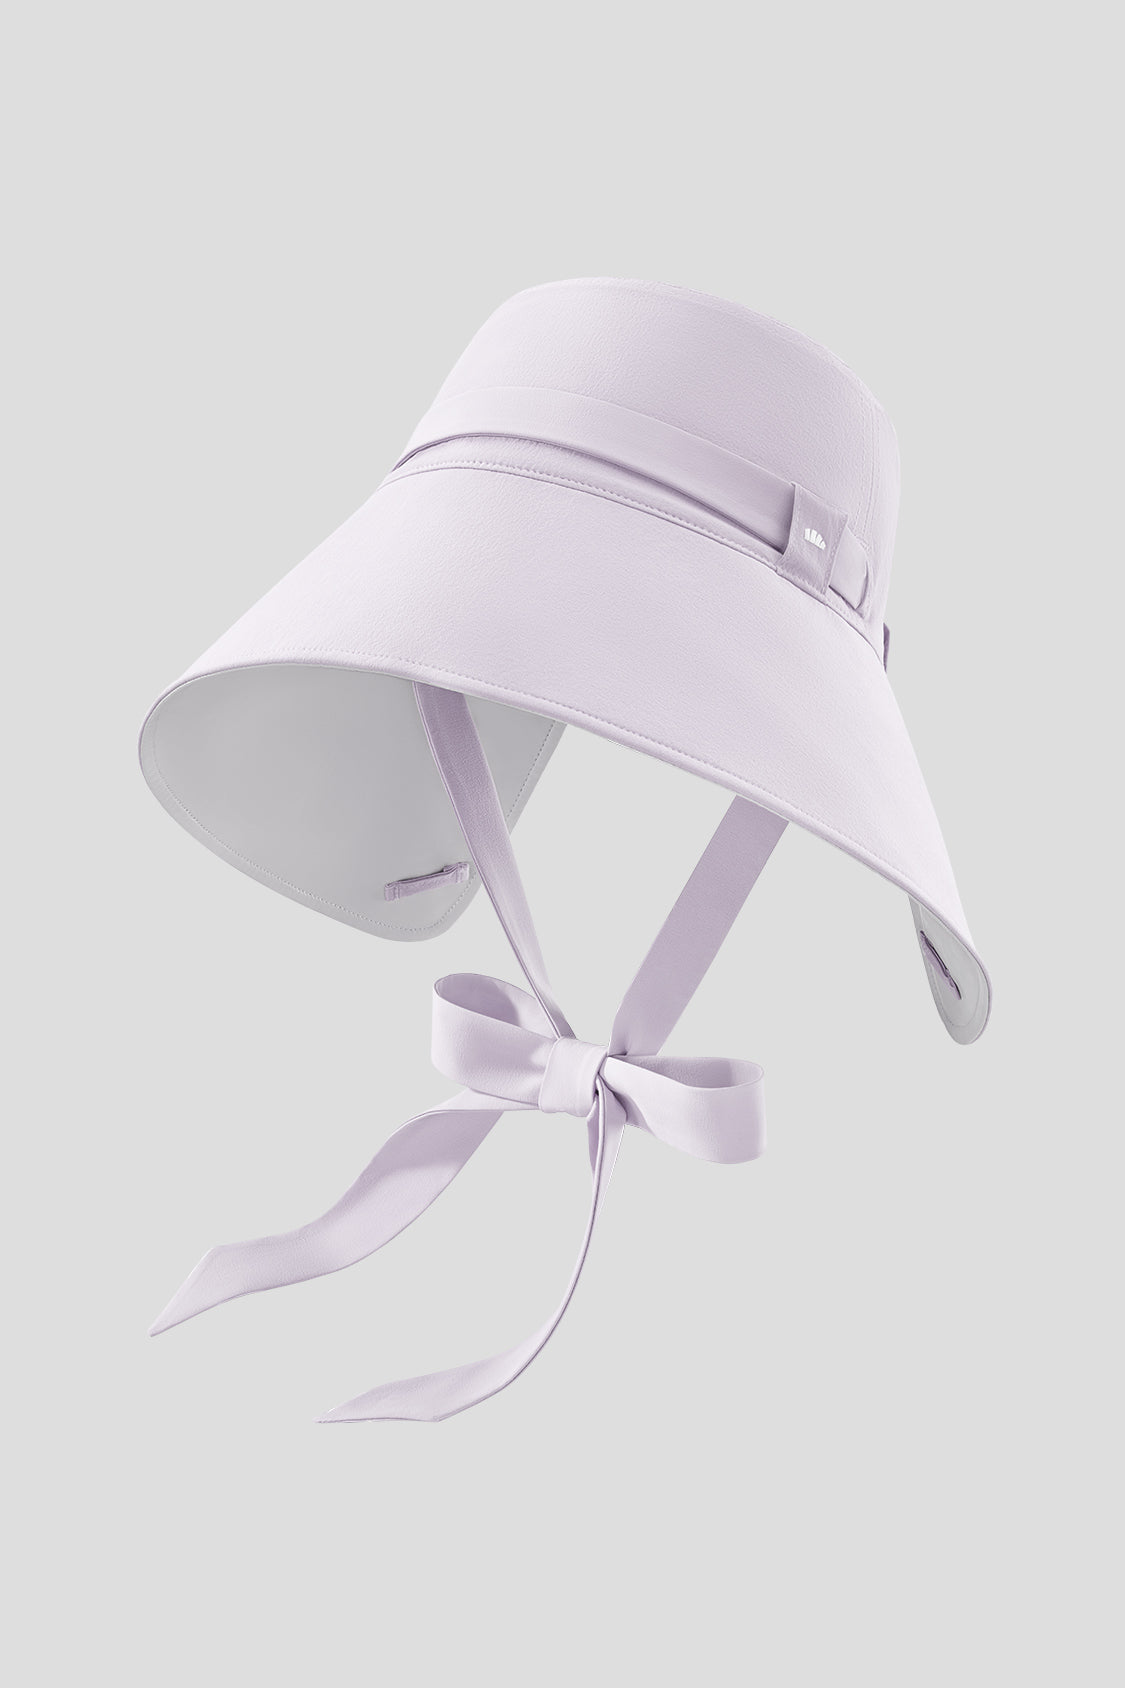 Womens Tethered Sun Hat With Bow With Wide Brim And Double Large Brimming  Back Packing For Outdoor Sun Protection From Humom, $9.22